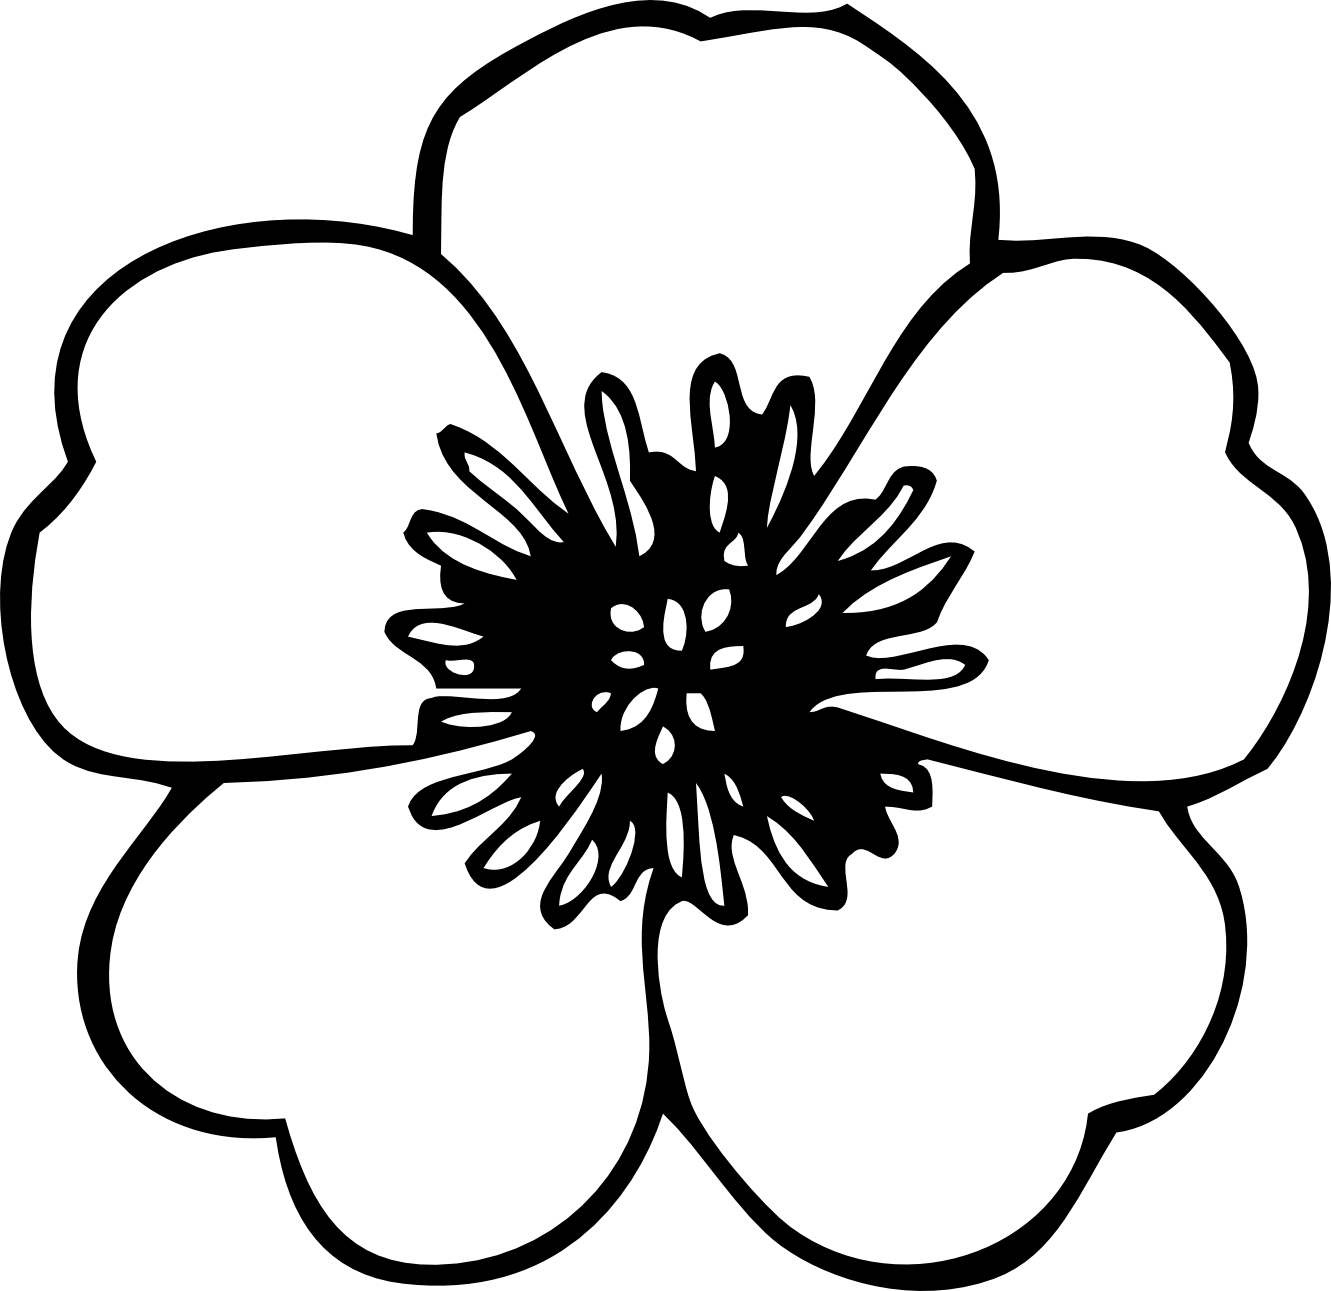 Flower Clip Art Black and White Logo - Free black and white flower picture transparent download